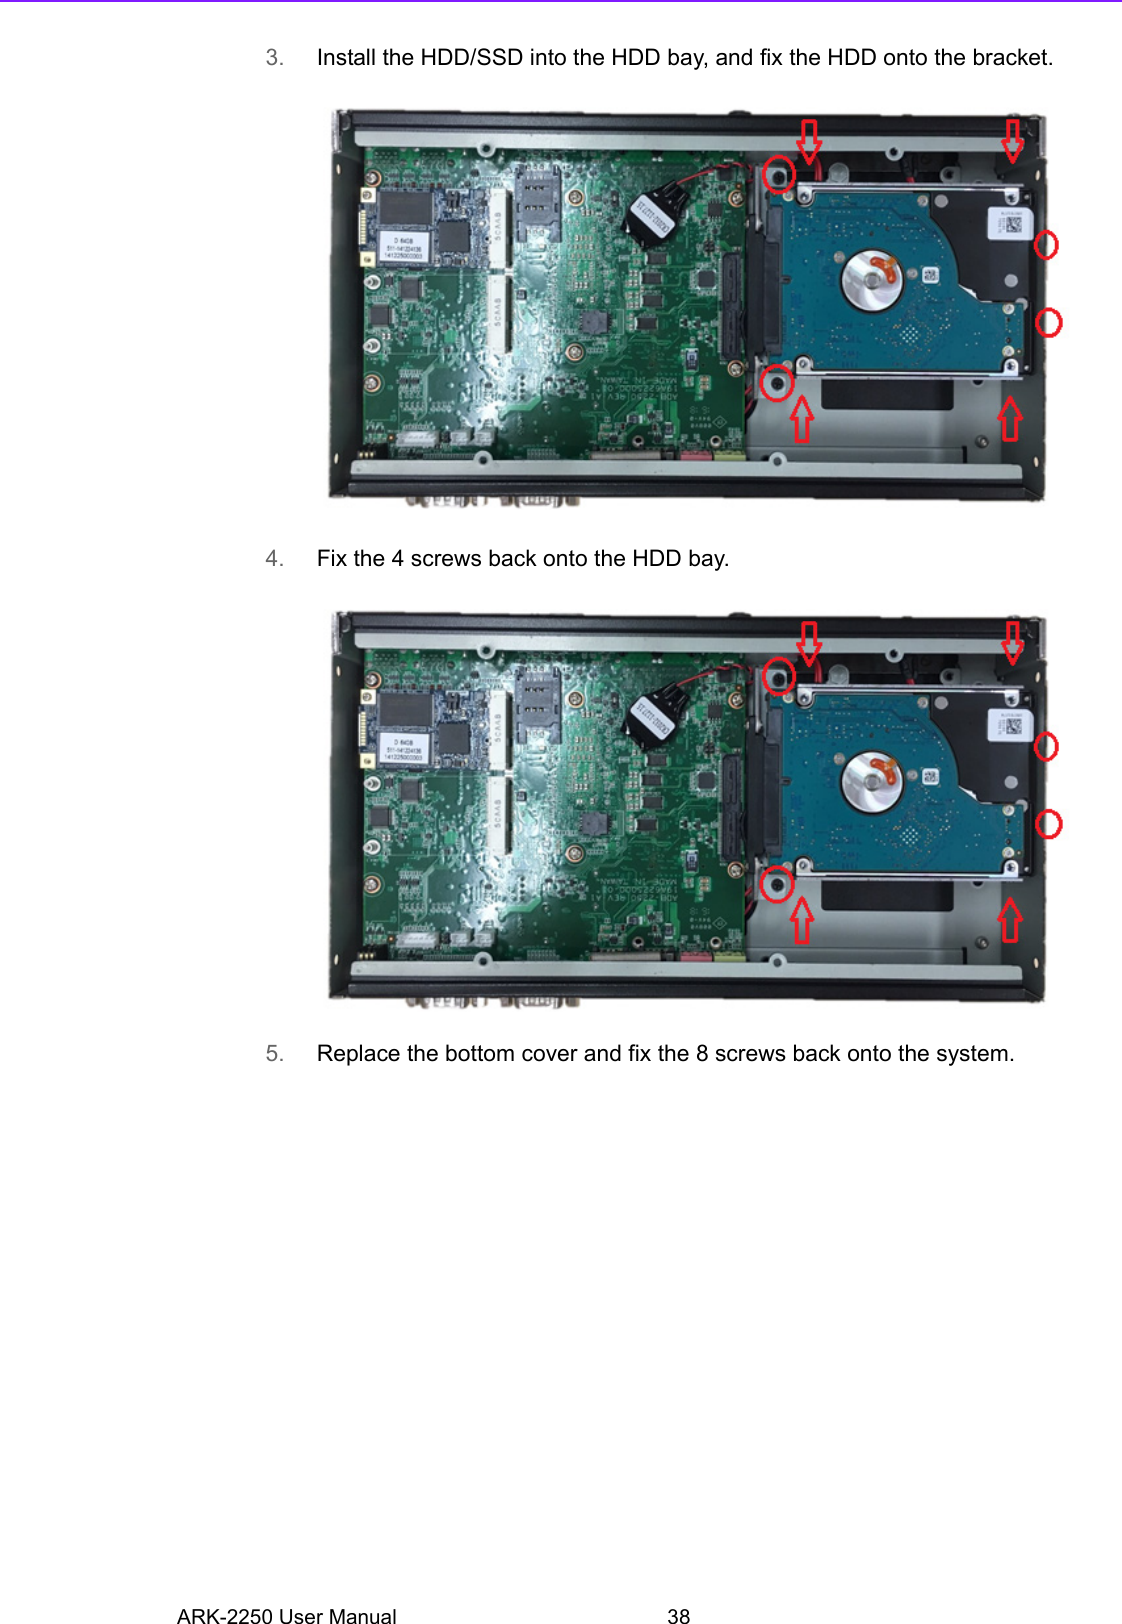 ARK-2250 User Manual 383. Install the HDD/SSD into the HDD bay, and fix the HDD onto the bracket.4. Fix the 4 screws back onto the HDD bay.5. Replace the bottom cover and fix the 8 screws back onto the system.